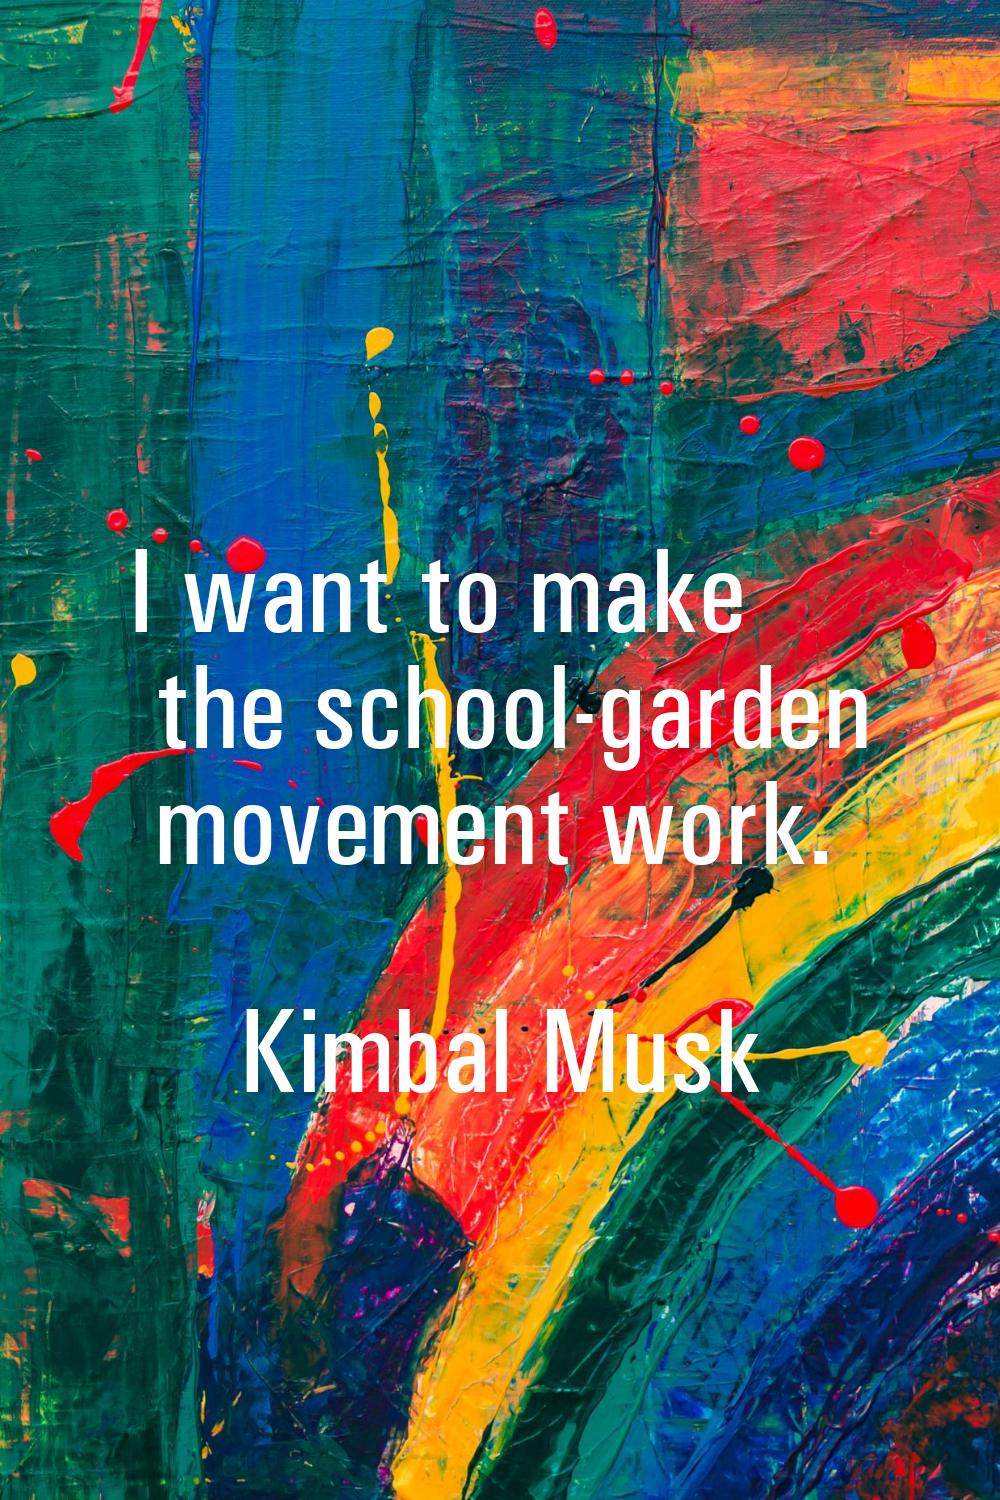 I want to make the school-garden movement work.